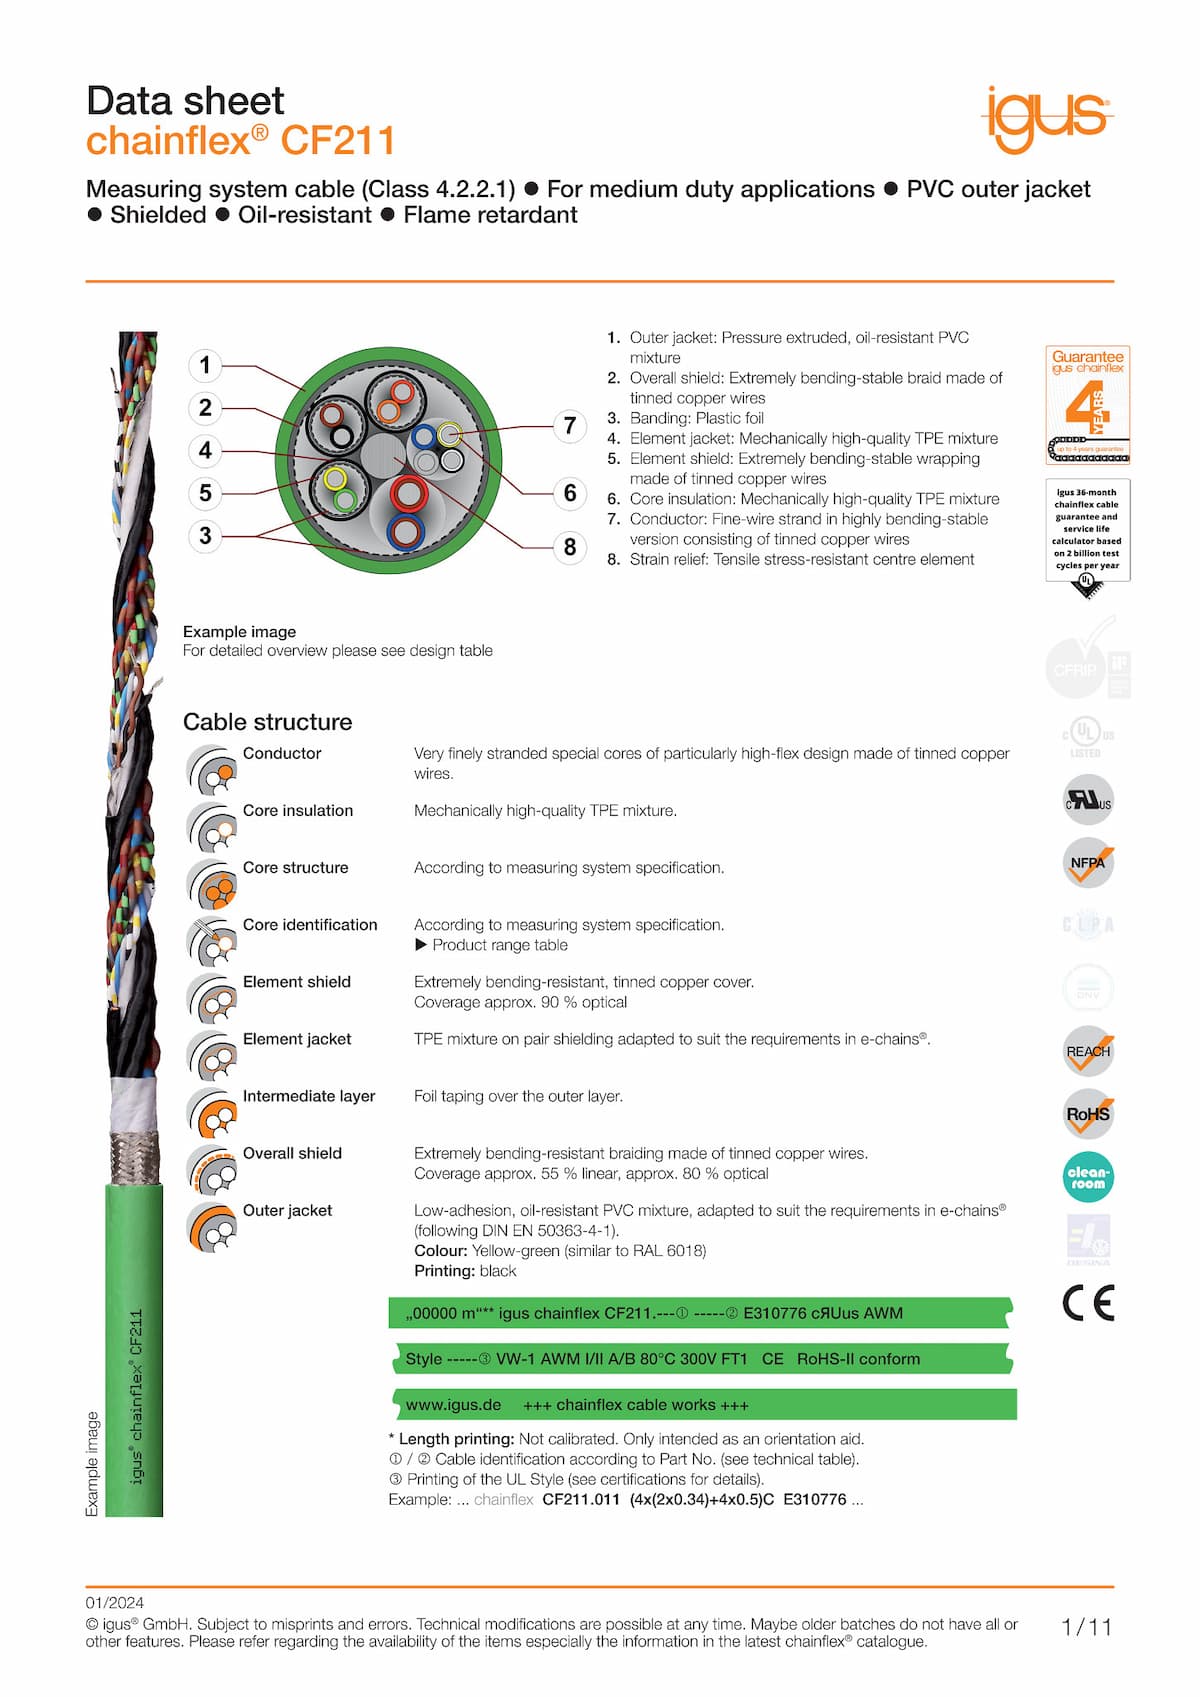 Technical data sheet chainflex® measuring system cable CF211